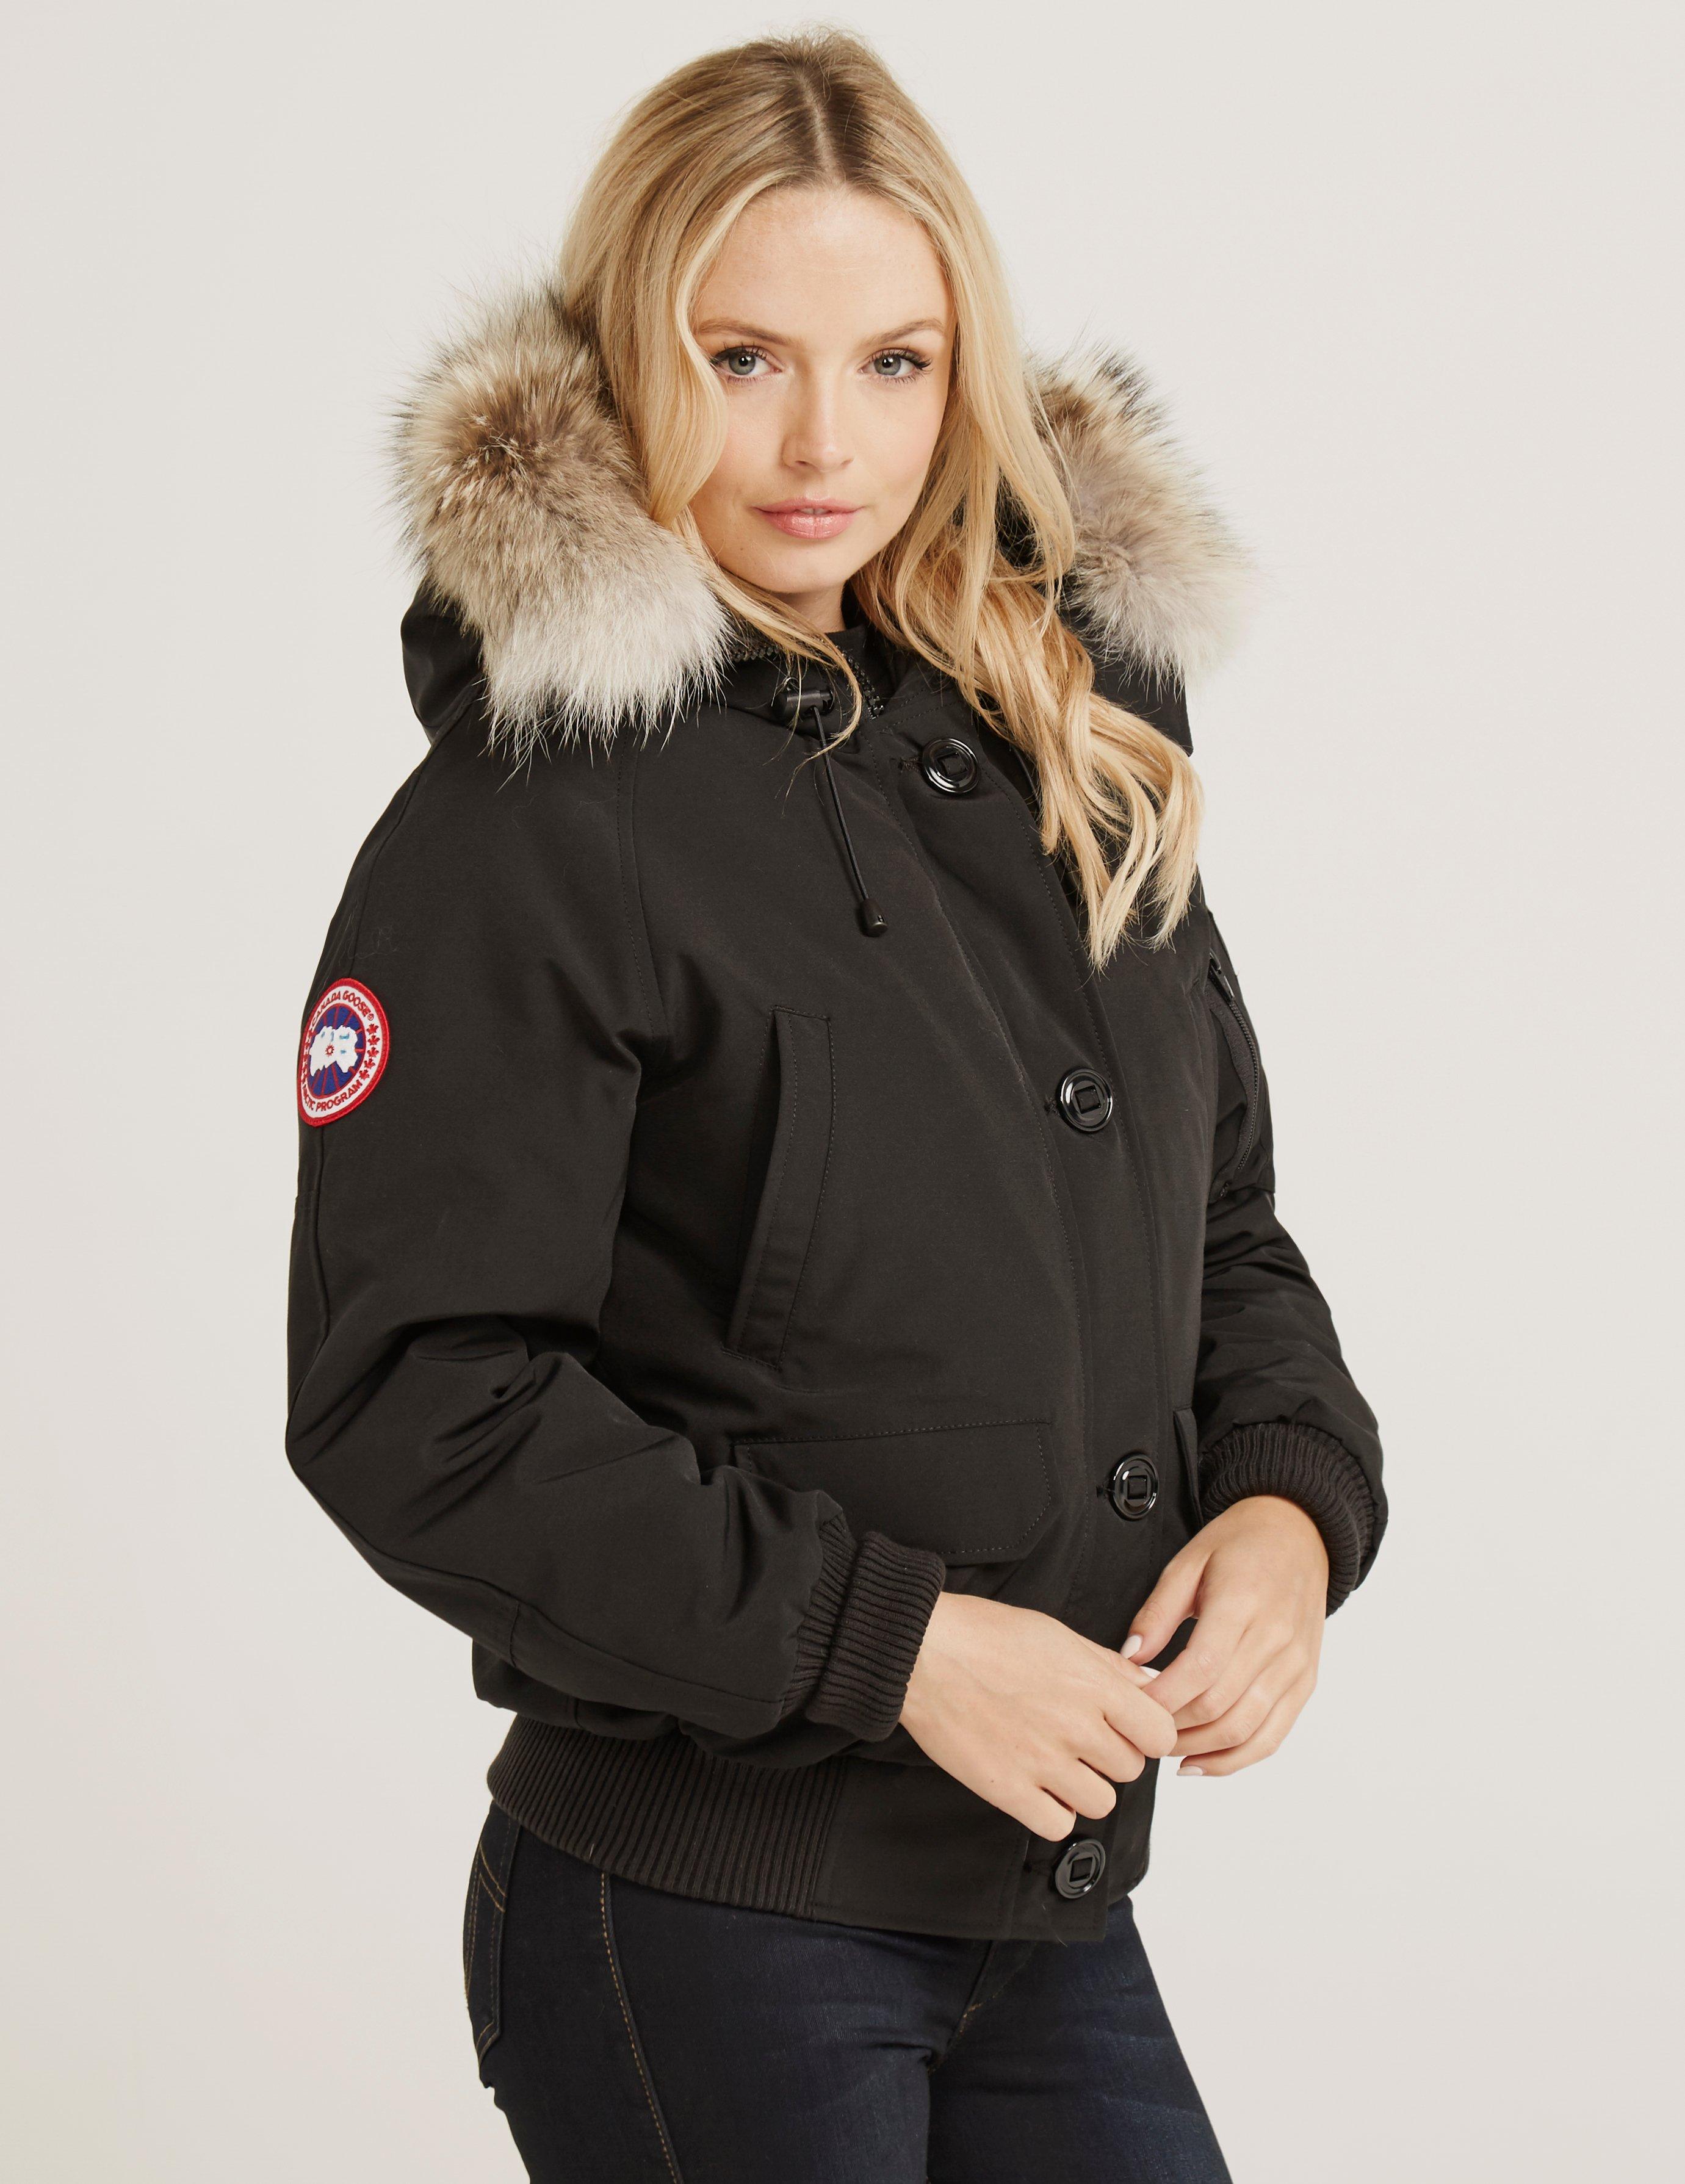 Womens Canada Goose Chilliwack Bomber Luxembourg, SAVE 48% - aveclumiere.com